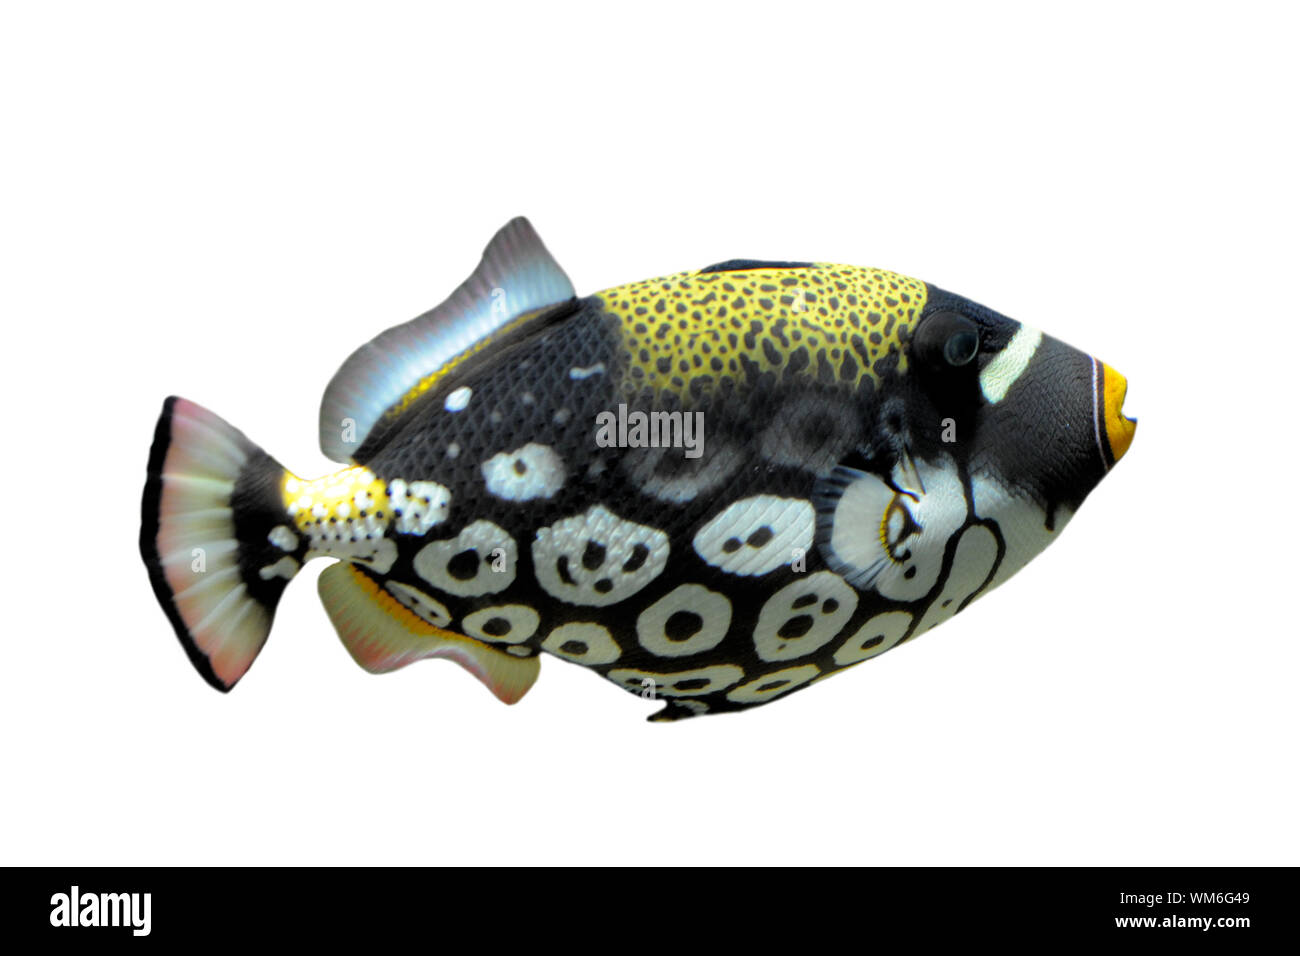 Clown triggerfish - Balistoides conspicillum in front of a white background. Stock Photo